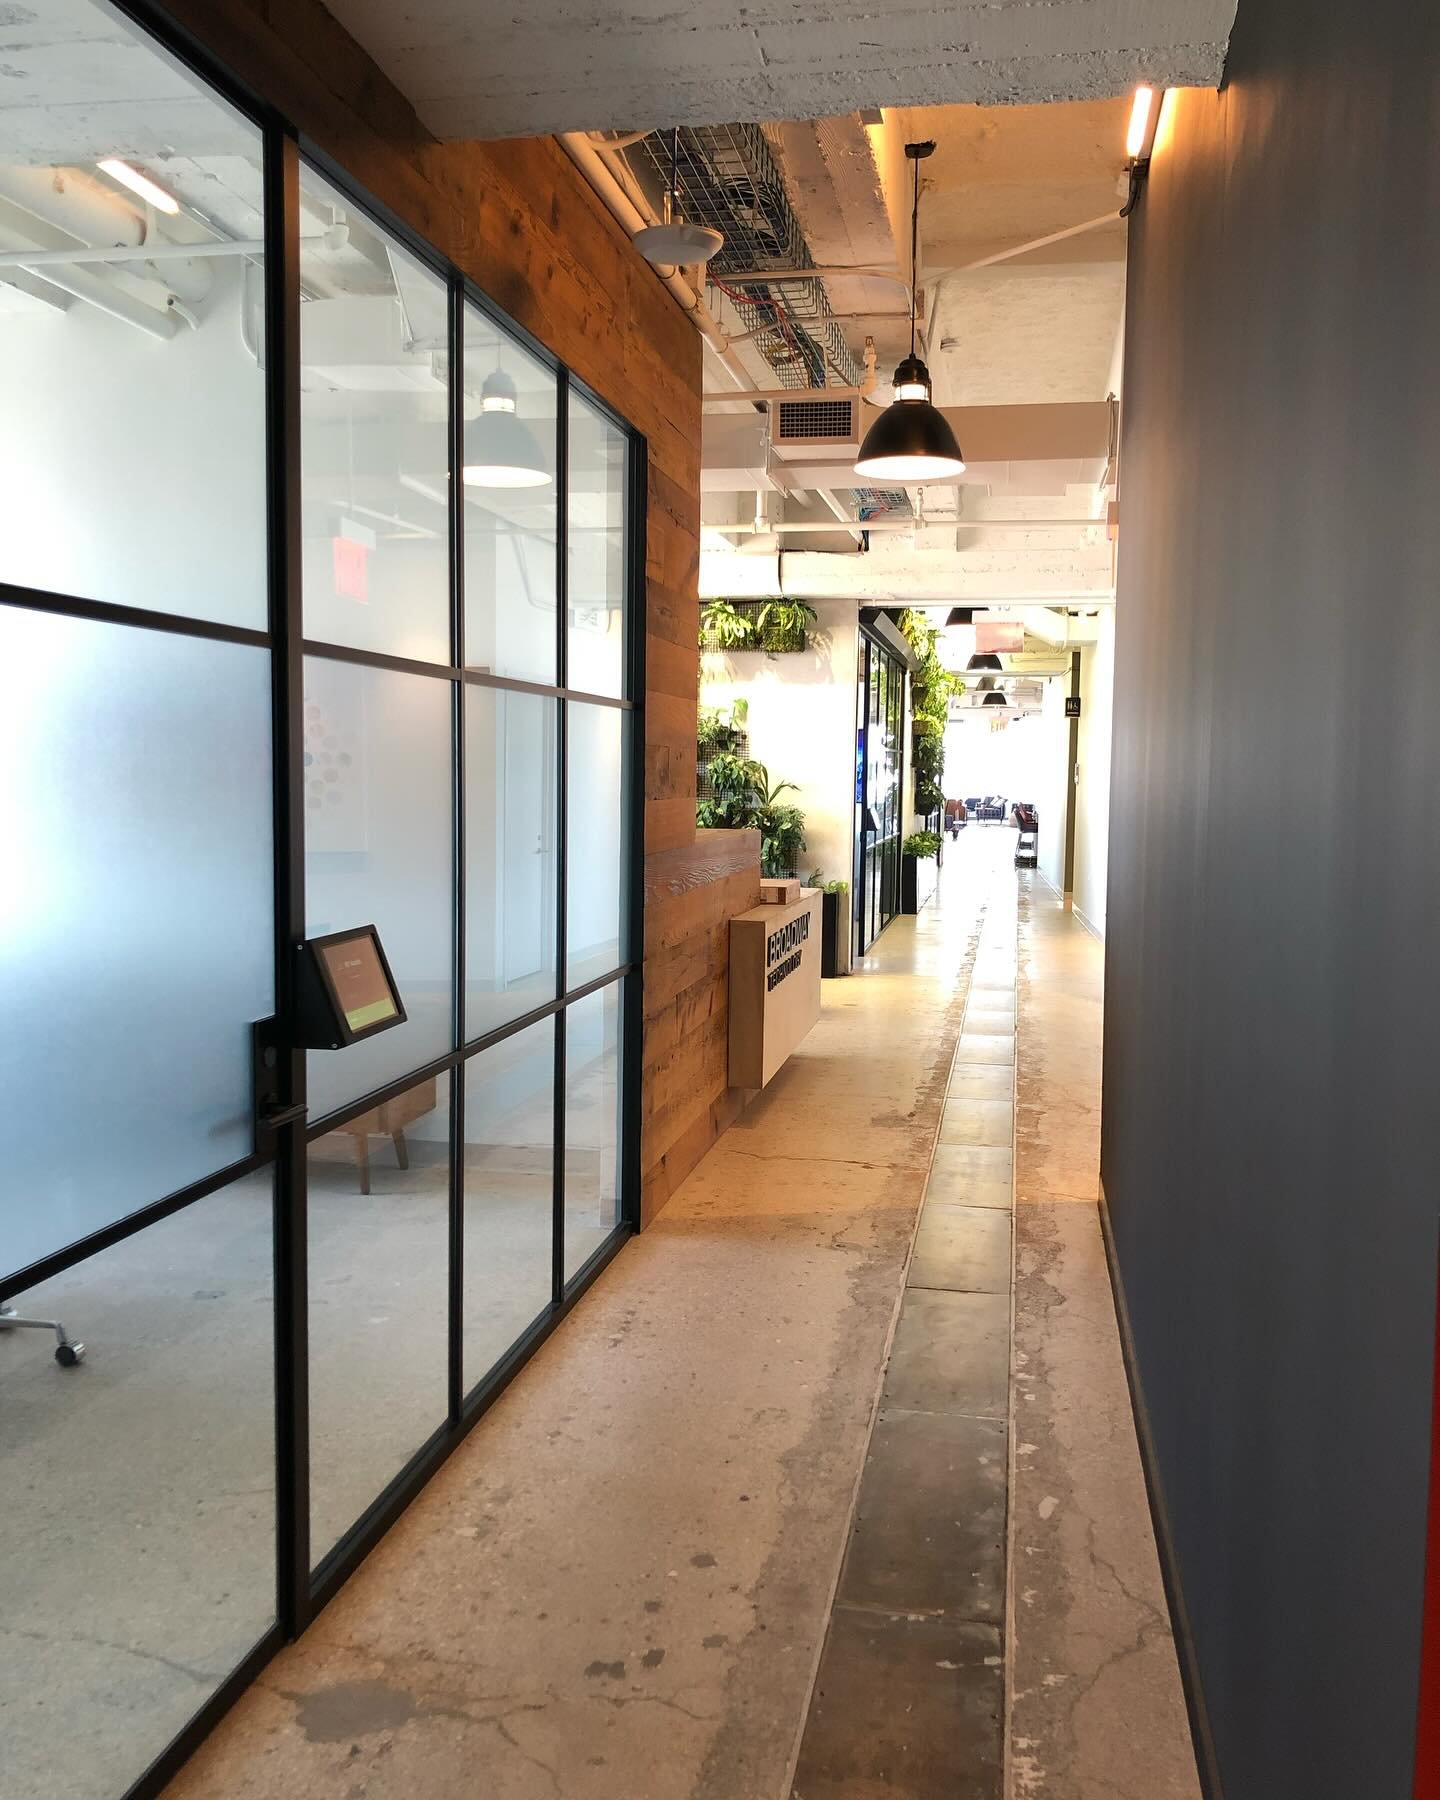 We are always finding ways to create simple office design. We delved into exploring a bit of vintage paneling with @tagwallnyc and natural wood paneling with biophilic incorporation 
-
-

#commercialofficedesign #glasswalls #officebreak  #officedesig